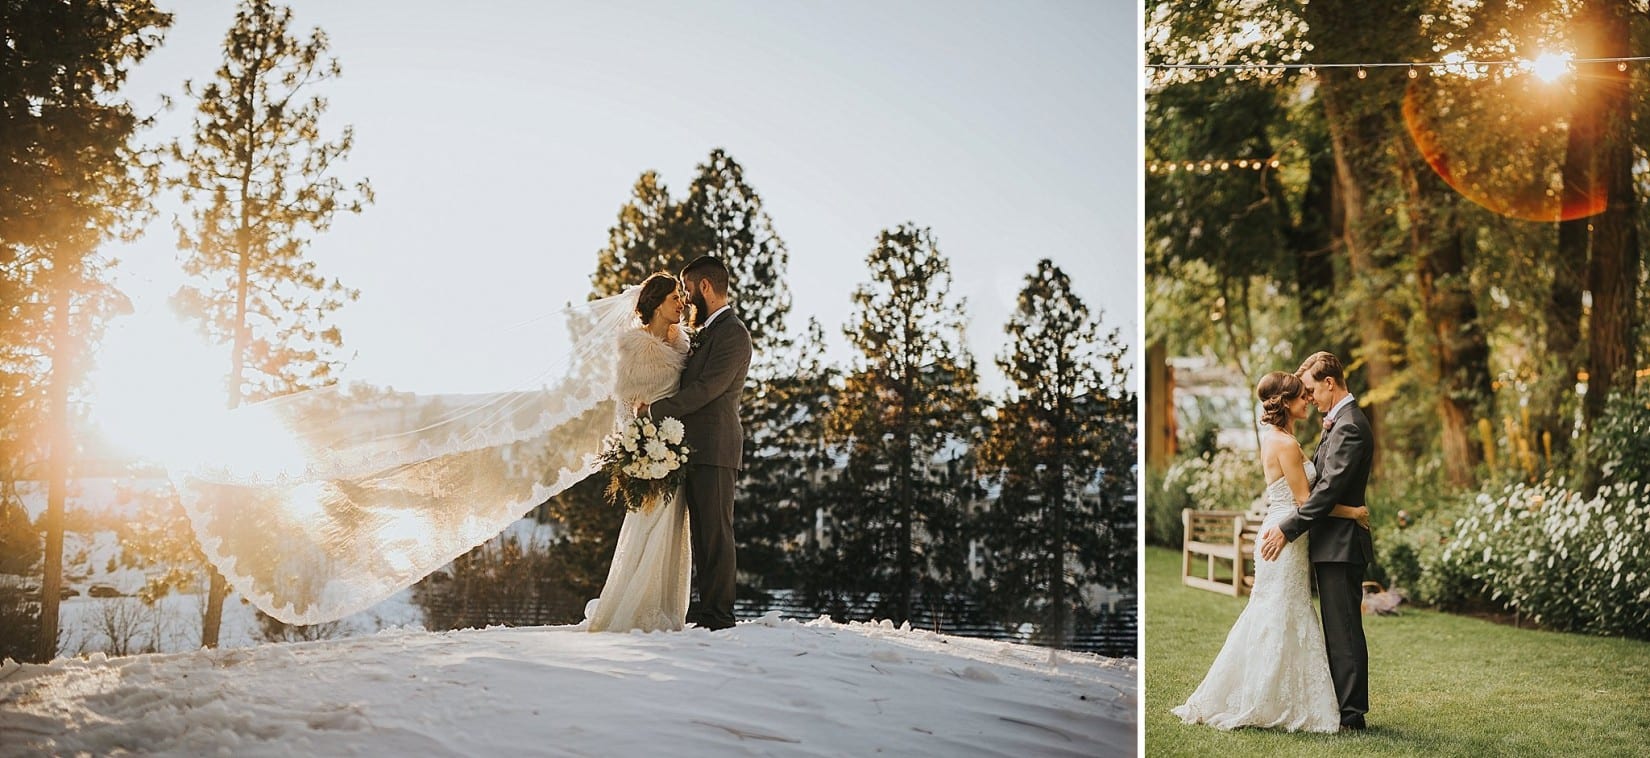 Looking for Kelowna's Best Wedding Photographer? Barnett Photography are married couple photographing weddings here in the beautiful Okanagan! Winners of the Kelowna Now Best of Kelowna two years in a row!